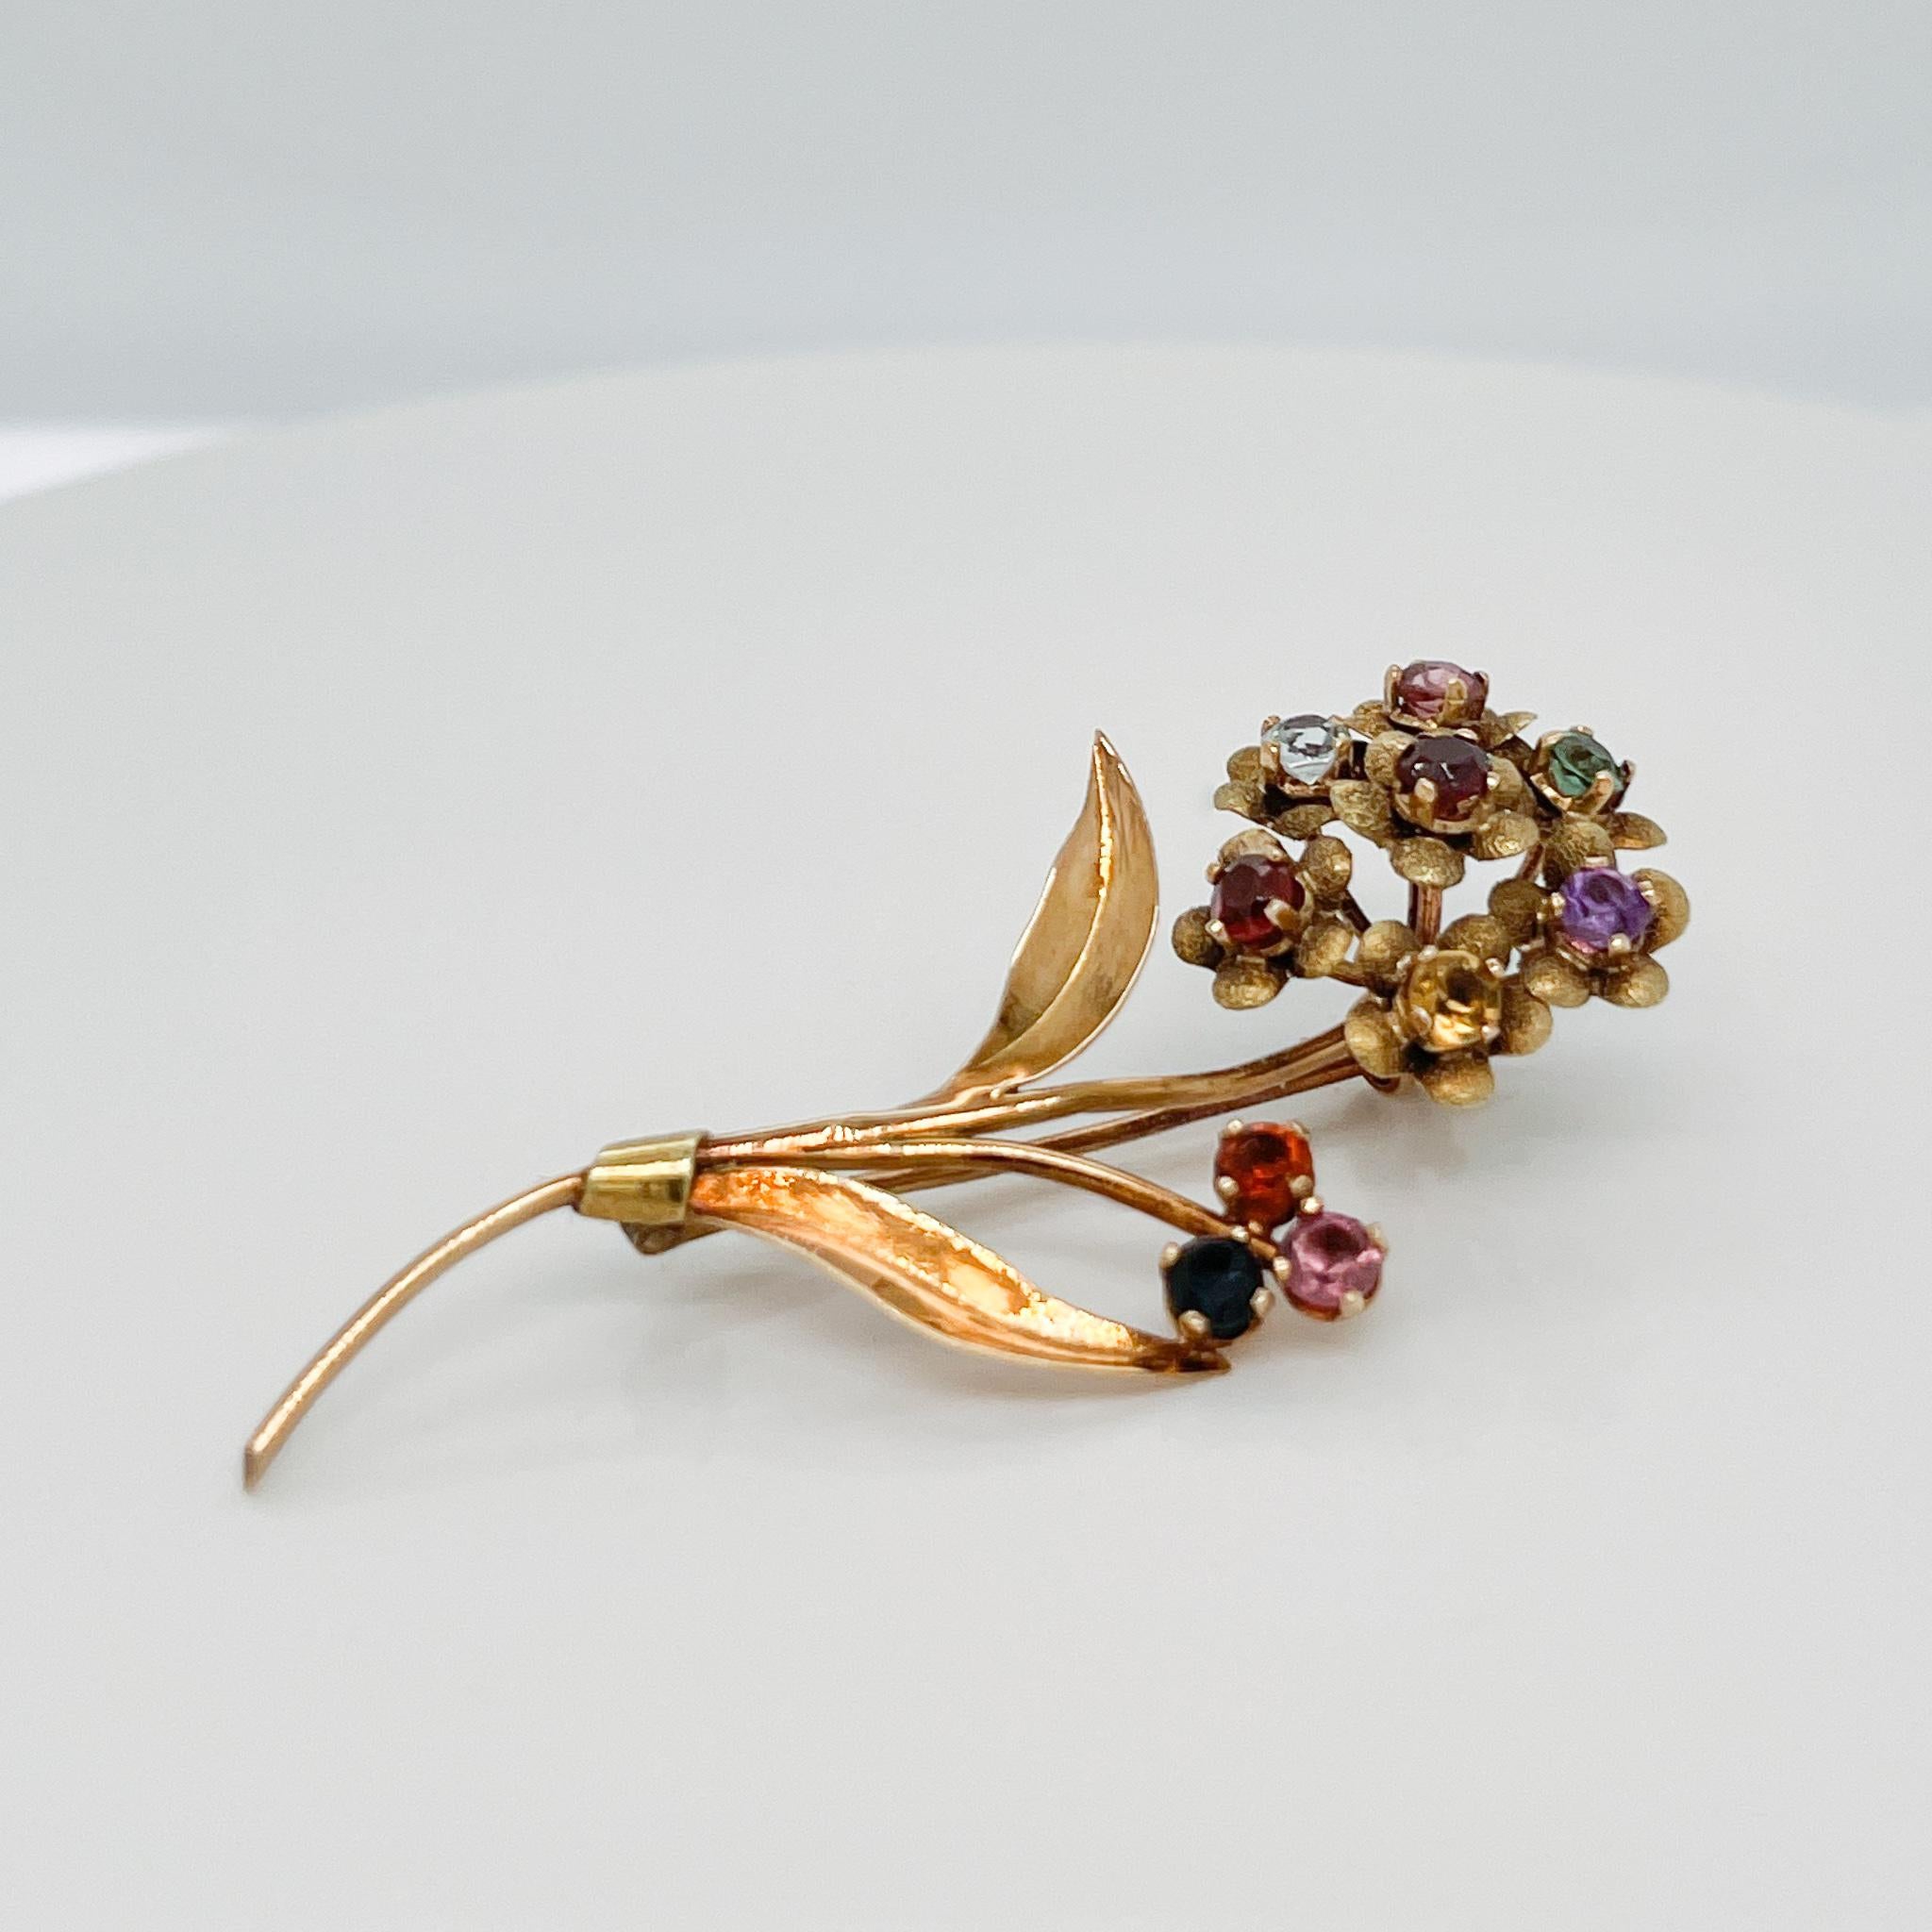 A fine Mid-Century flower brooch or lapel pin.

In 18k gold.

With multiple prong-set faceted gemstones set as flower heads in a small bouquet.

Gemstones include pink & green tourmalines, amethyst, citrines, and garnets. 

Simply a wonderful